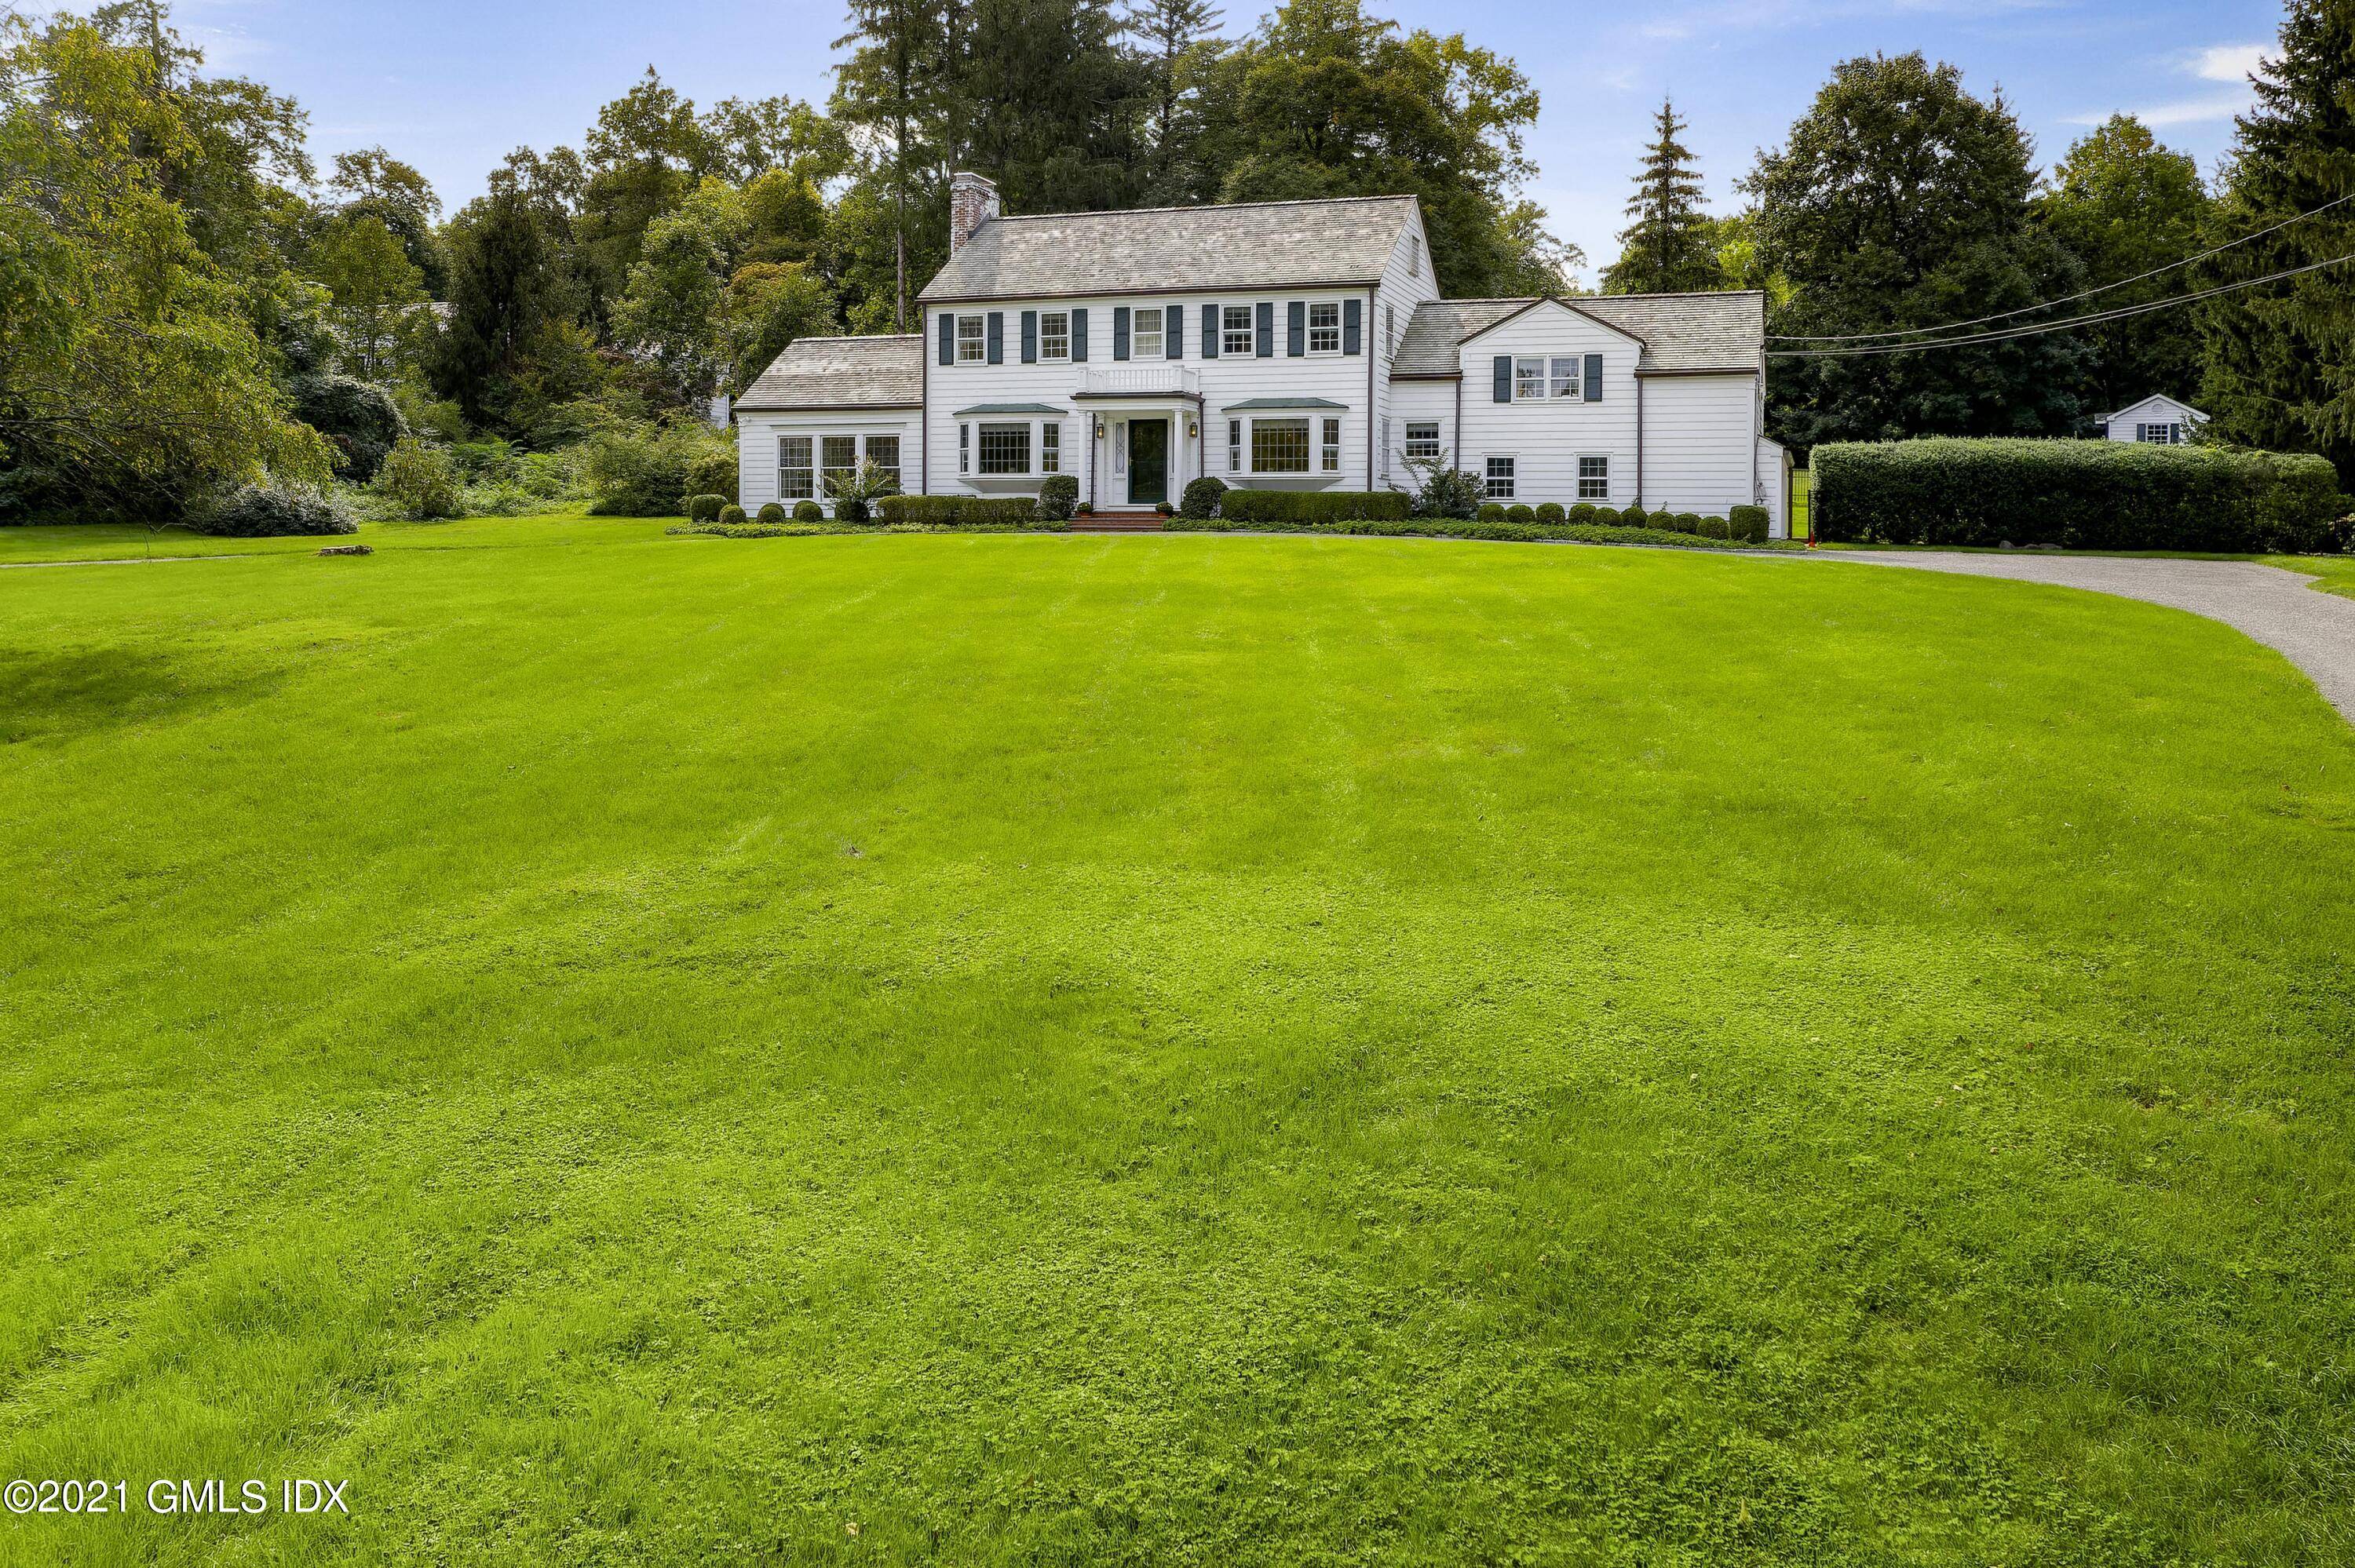 Classic center hall Colonial sits on breathtaking 2.